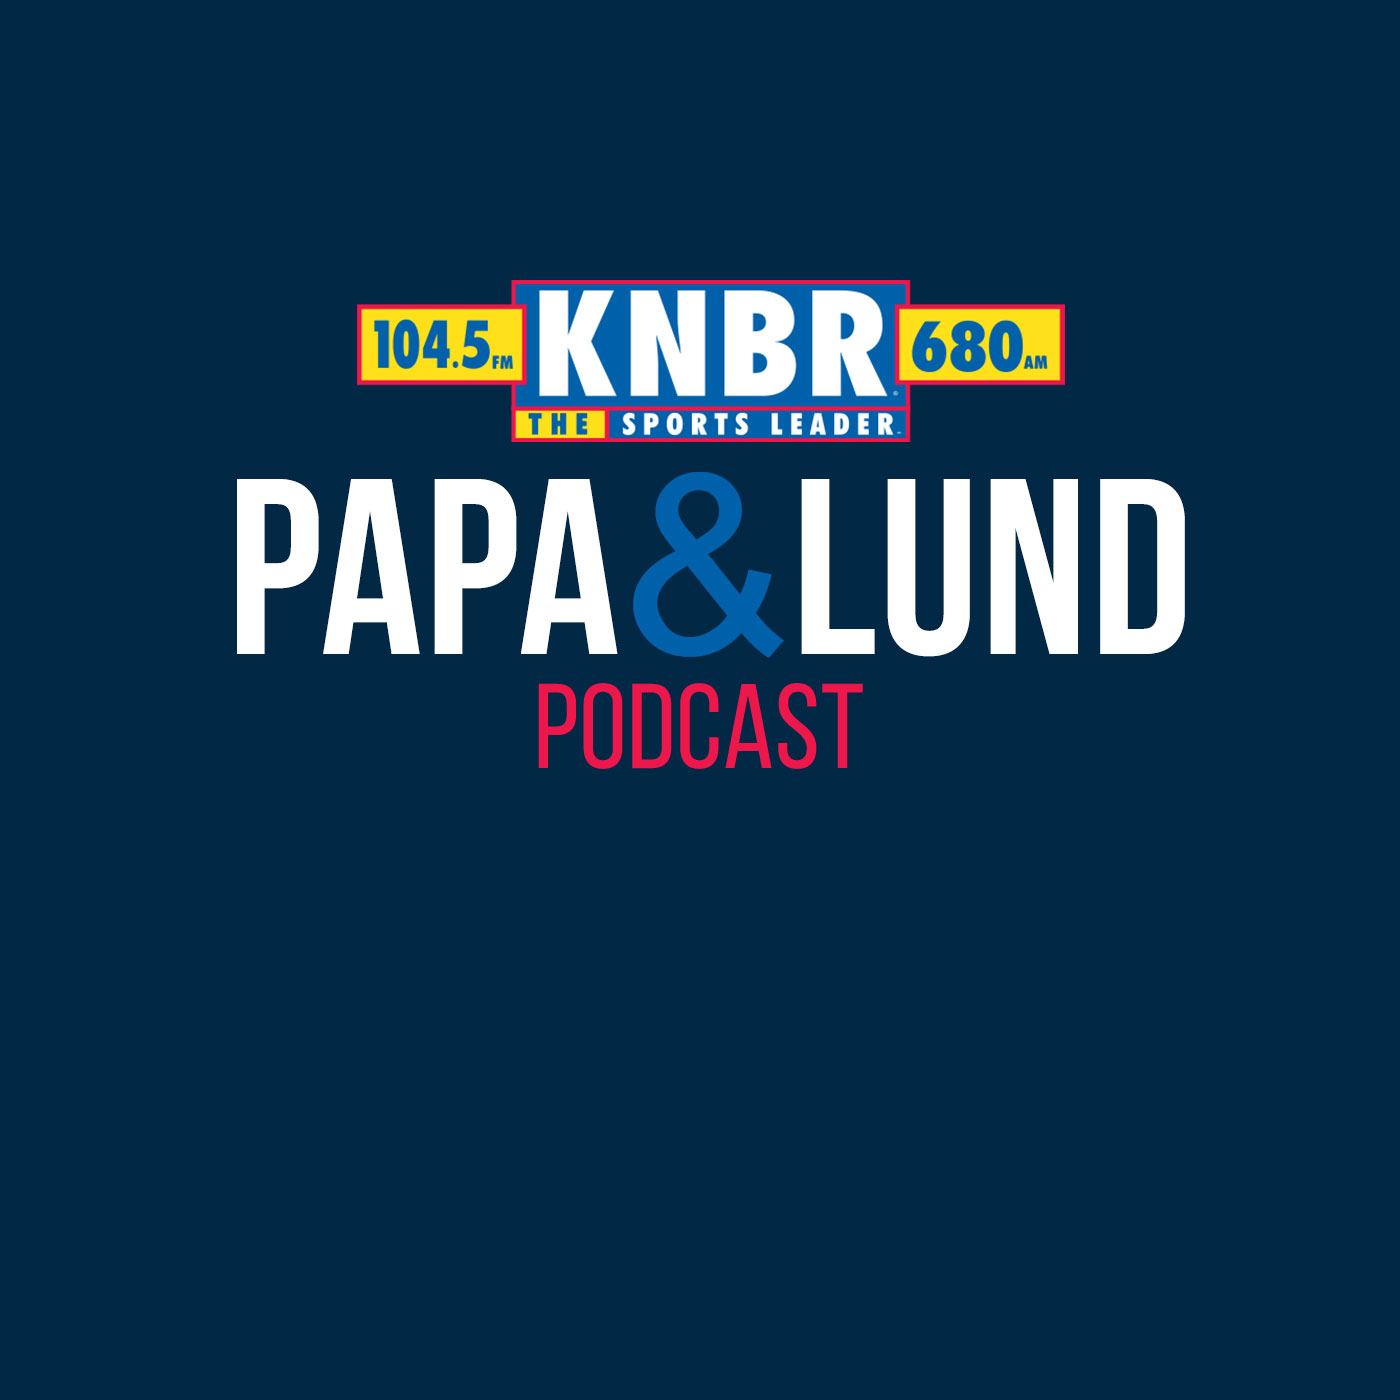 10-26 Rich Aurilia joins Papa & Lund to discuss the massive signing of Bob Melvin and what it means for potential free agents and the future development of the young talent on the Giants roster